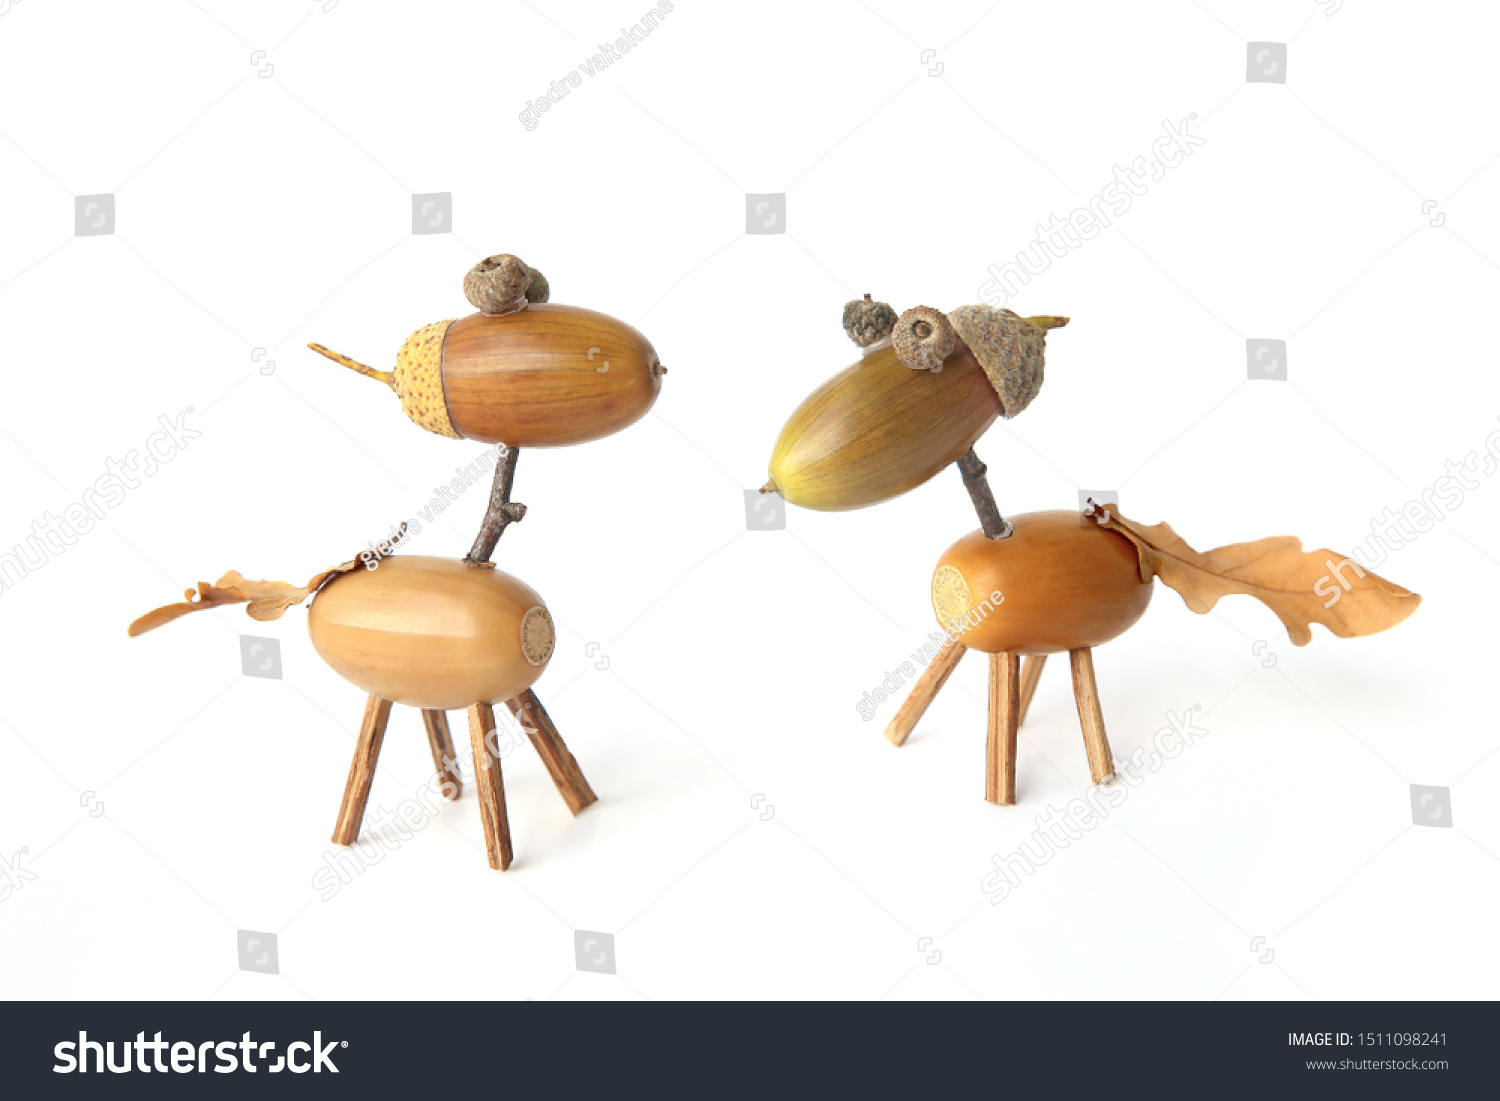 Cute small horses made from acorns isolated on white background. Creative funny animal figures made from acorn in autumn time. 
 #1511098241